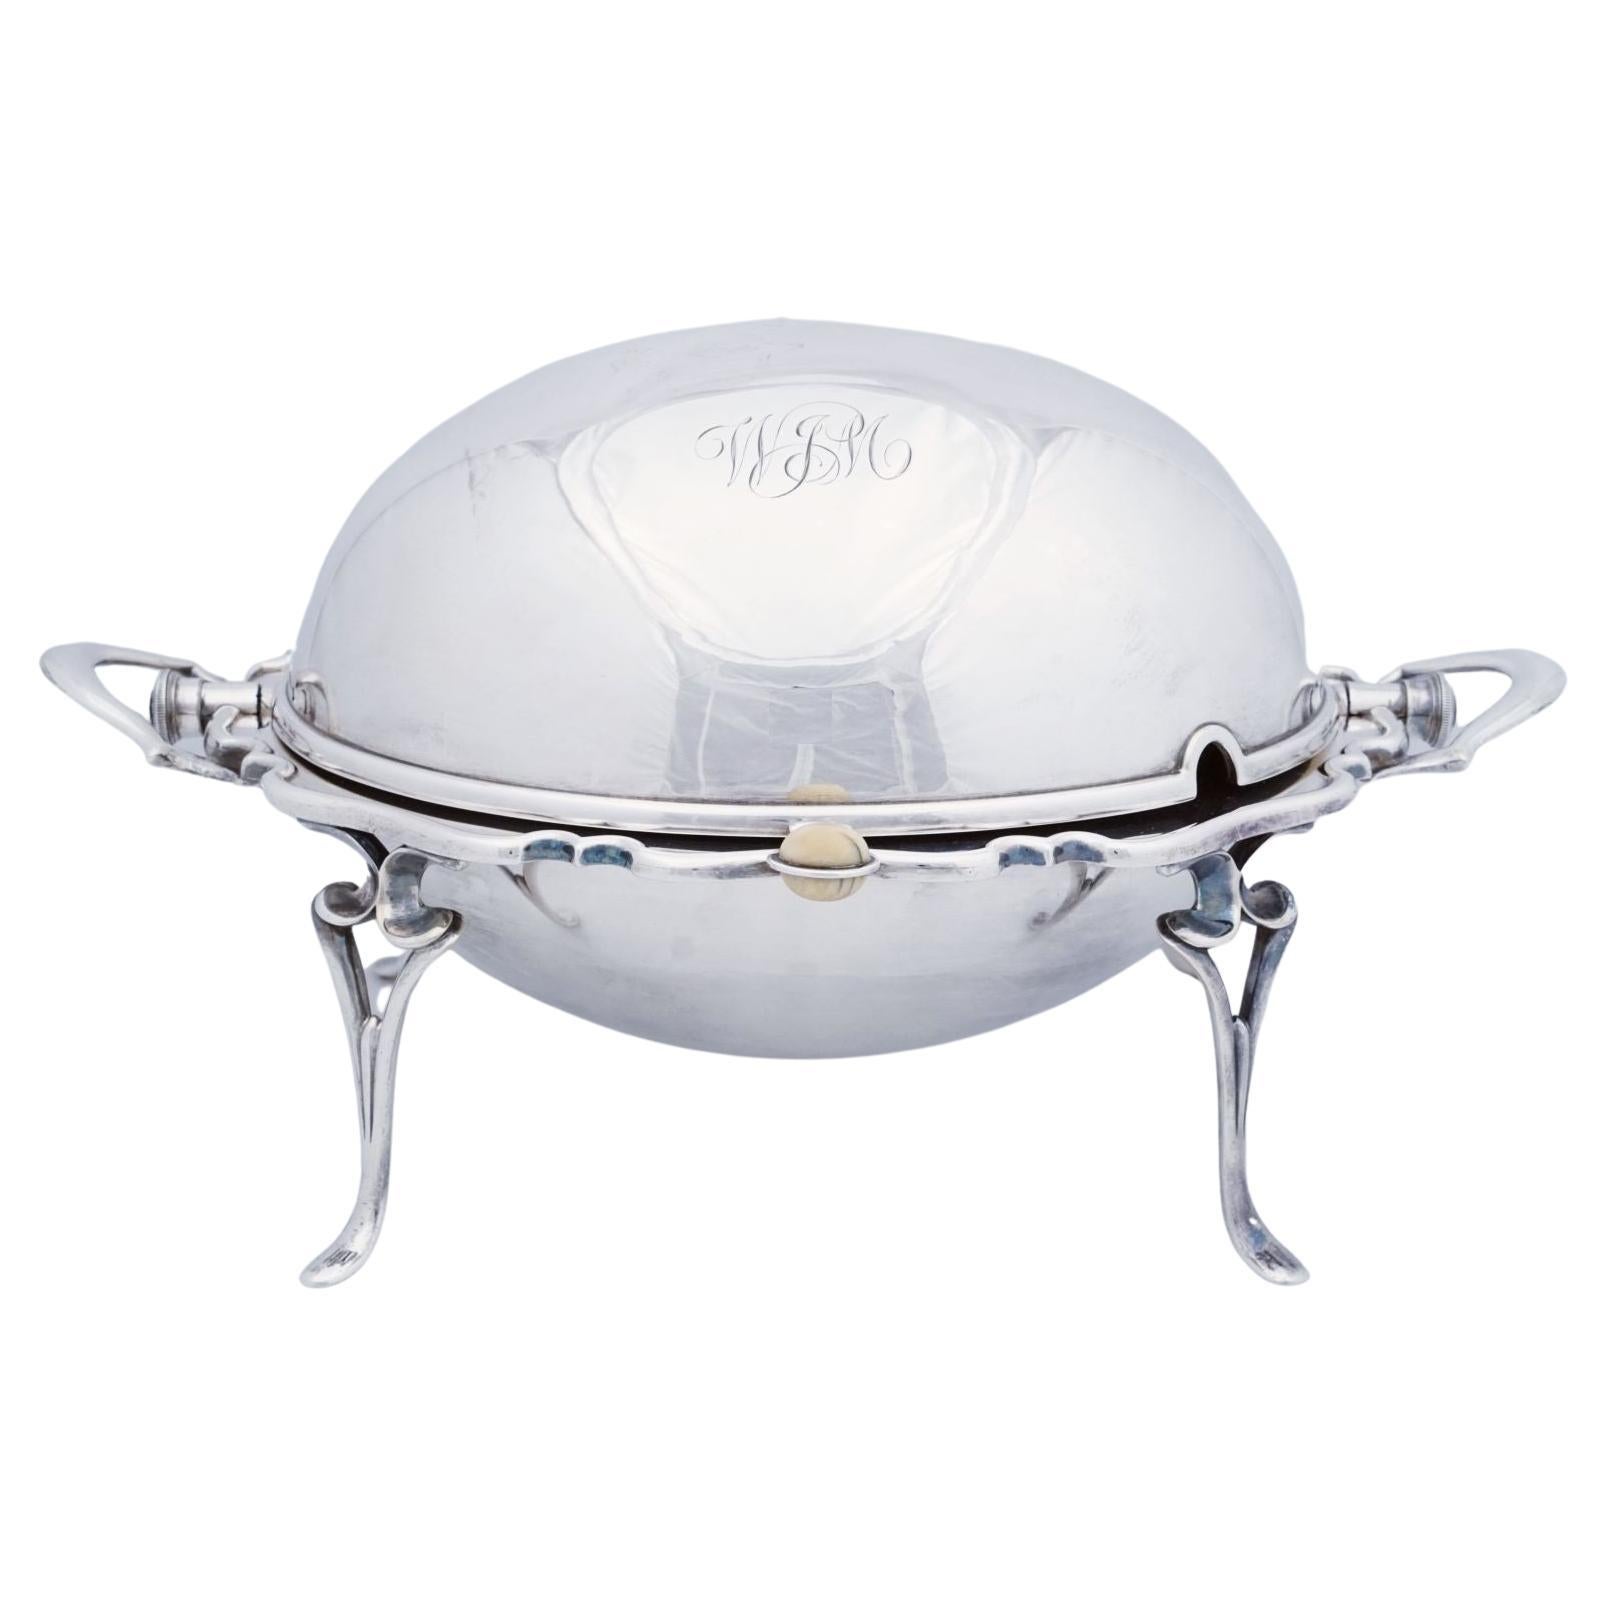 English Roll-Over Dome Top Silver Tureen or Footed Serving Dish For Sale